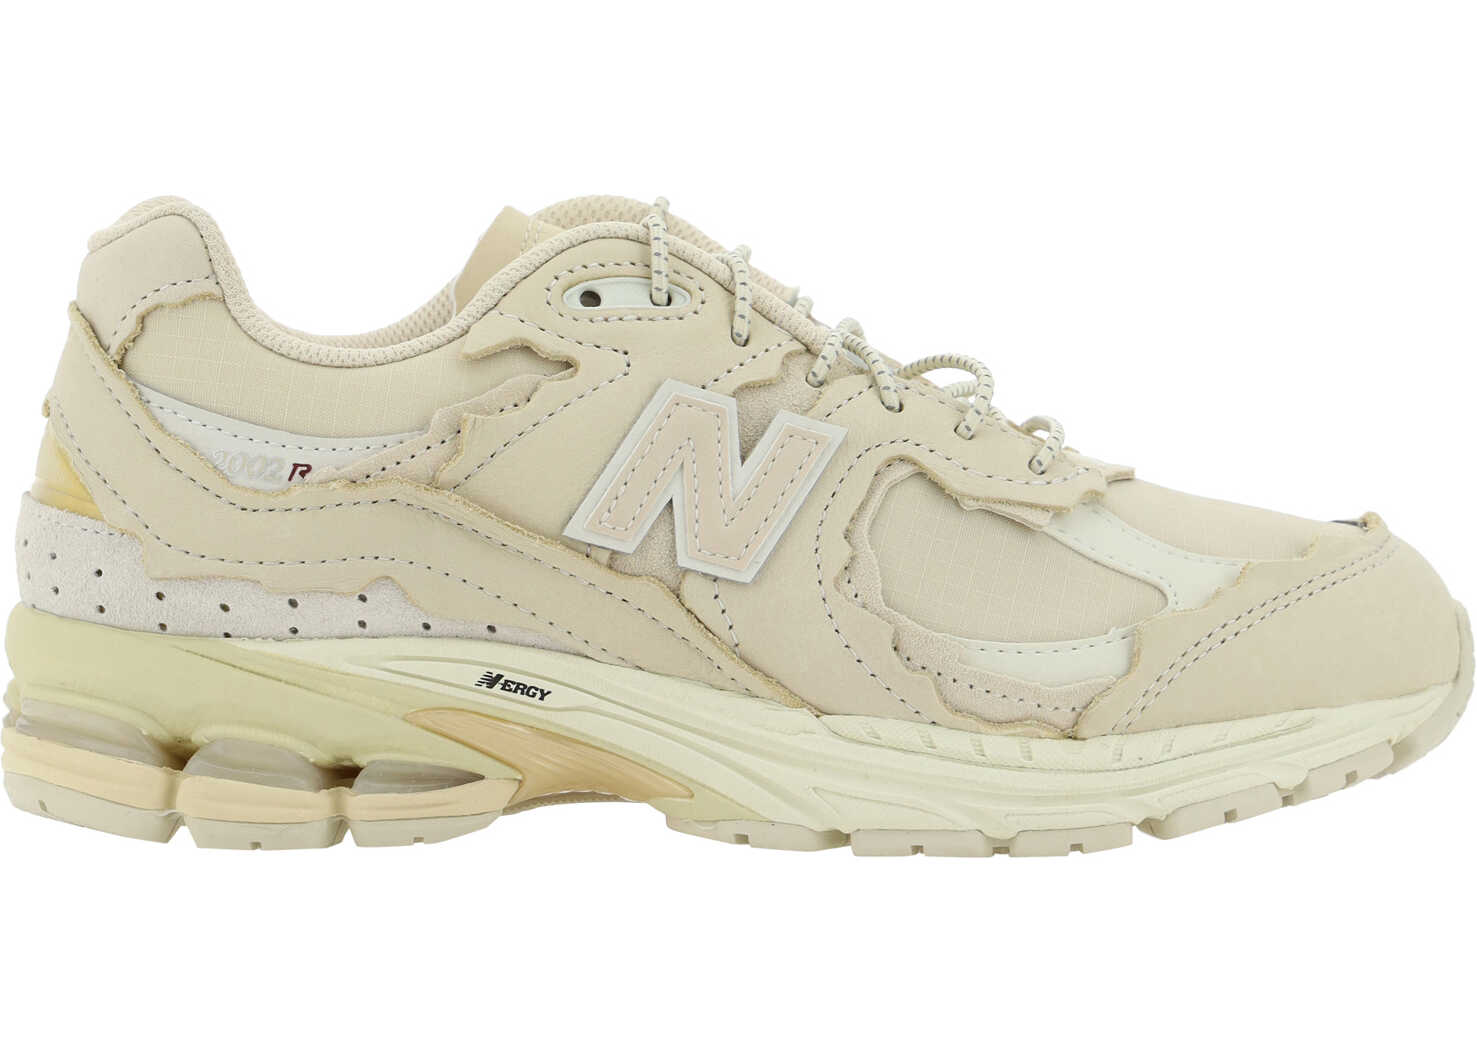 New Balance 2002R Lifestyle Sneakers SANDSTONE